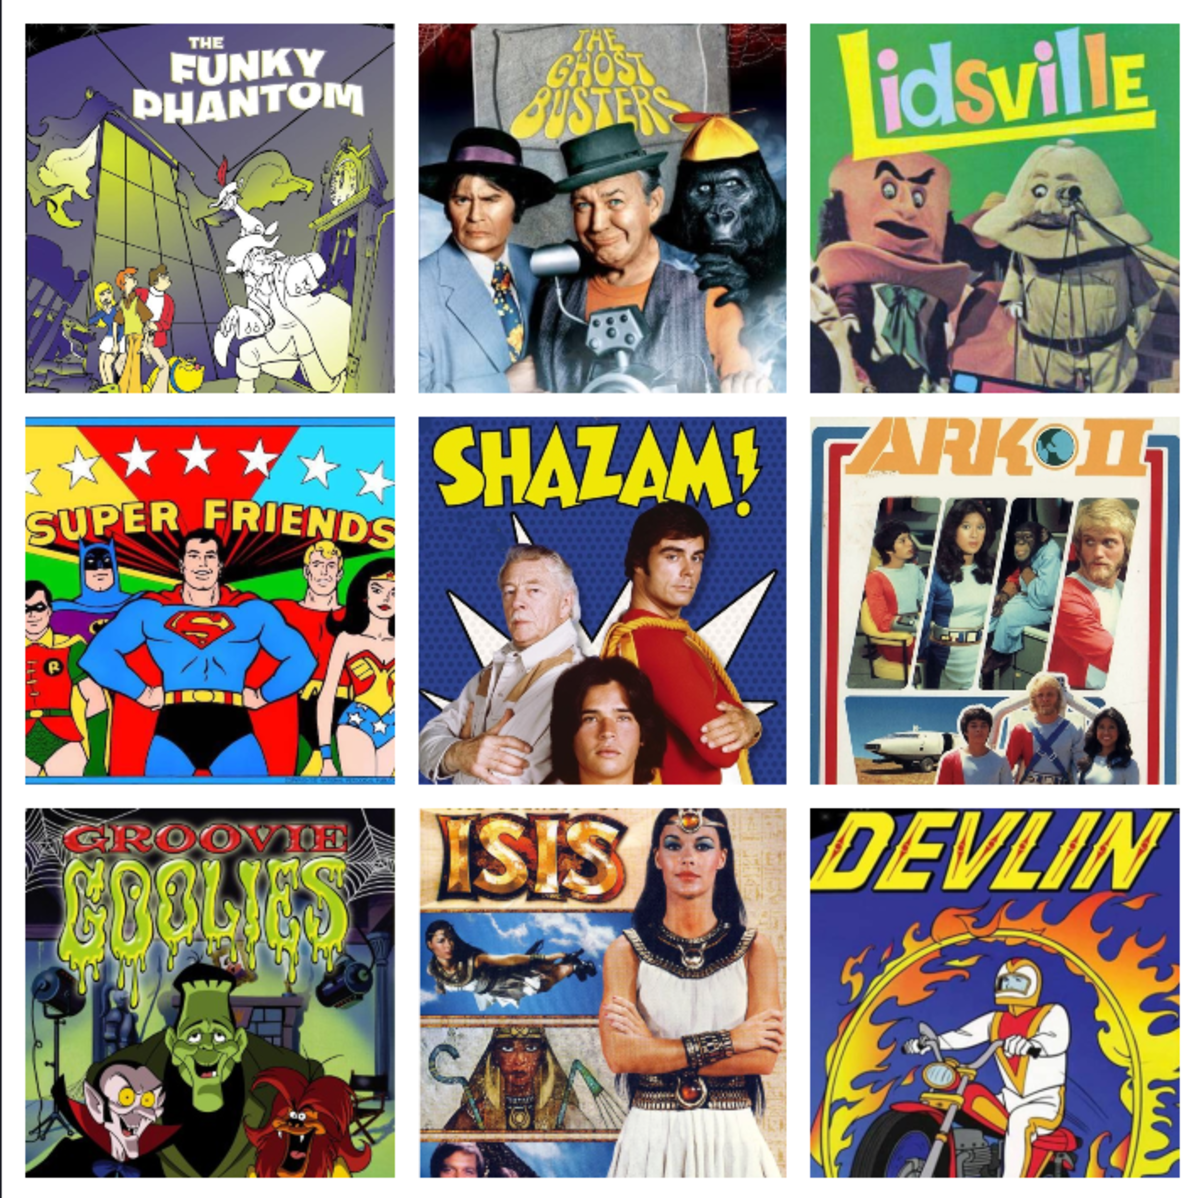 Saturday mornings in the 1970s were filled with cartoons and live-action shows, some classics, and some obscurities you can only find on YouTube—if you're lucky!